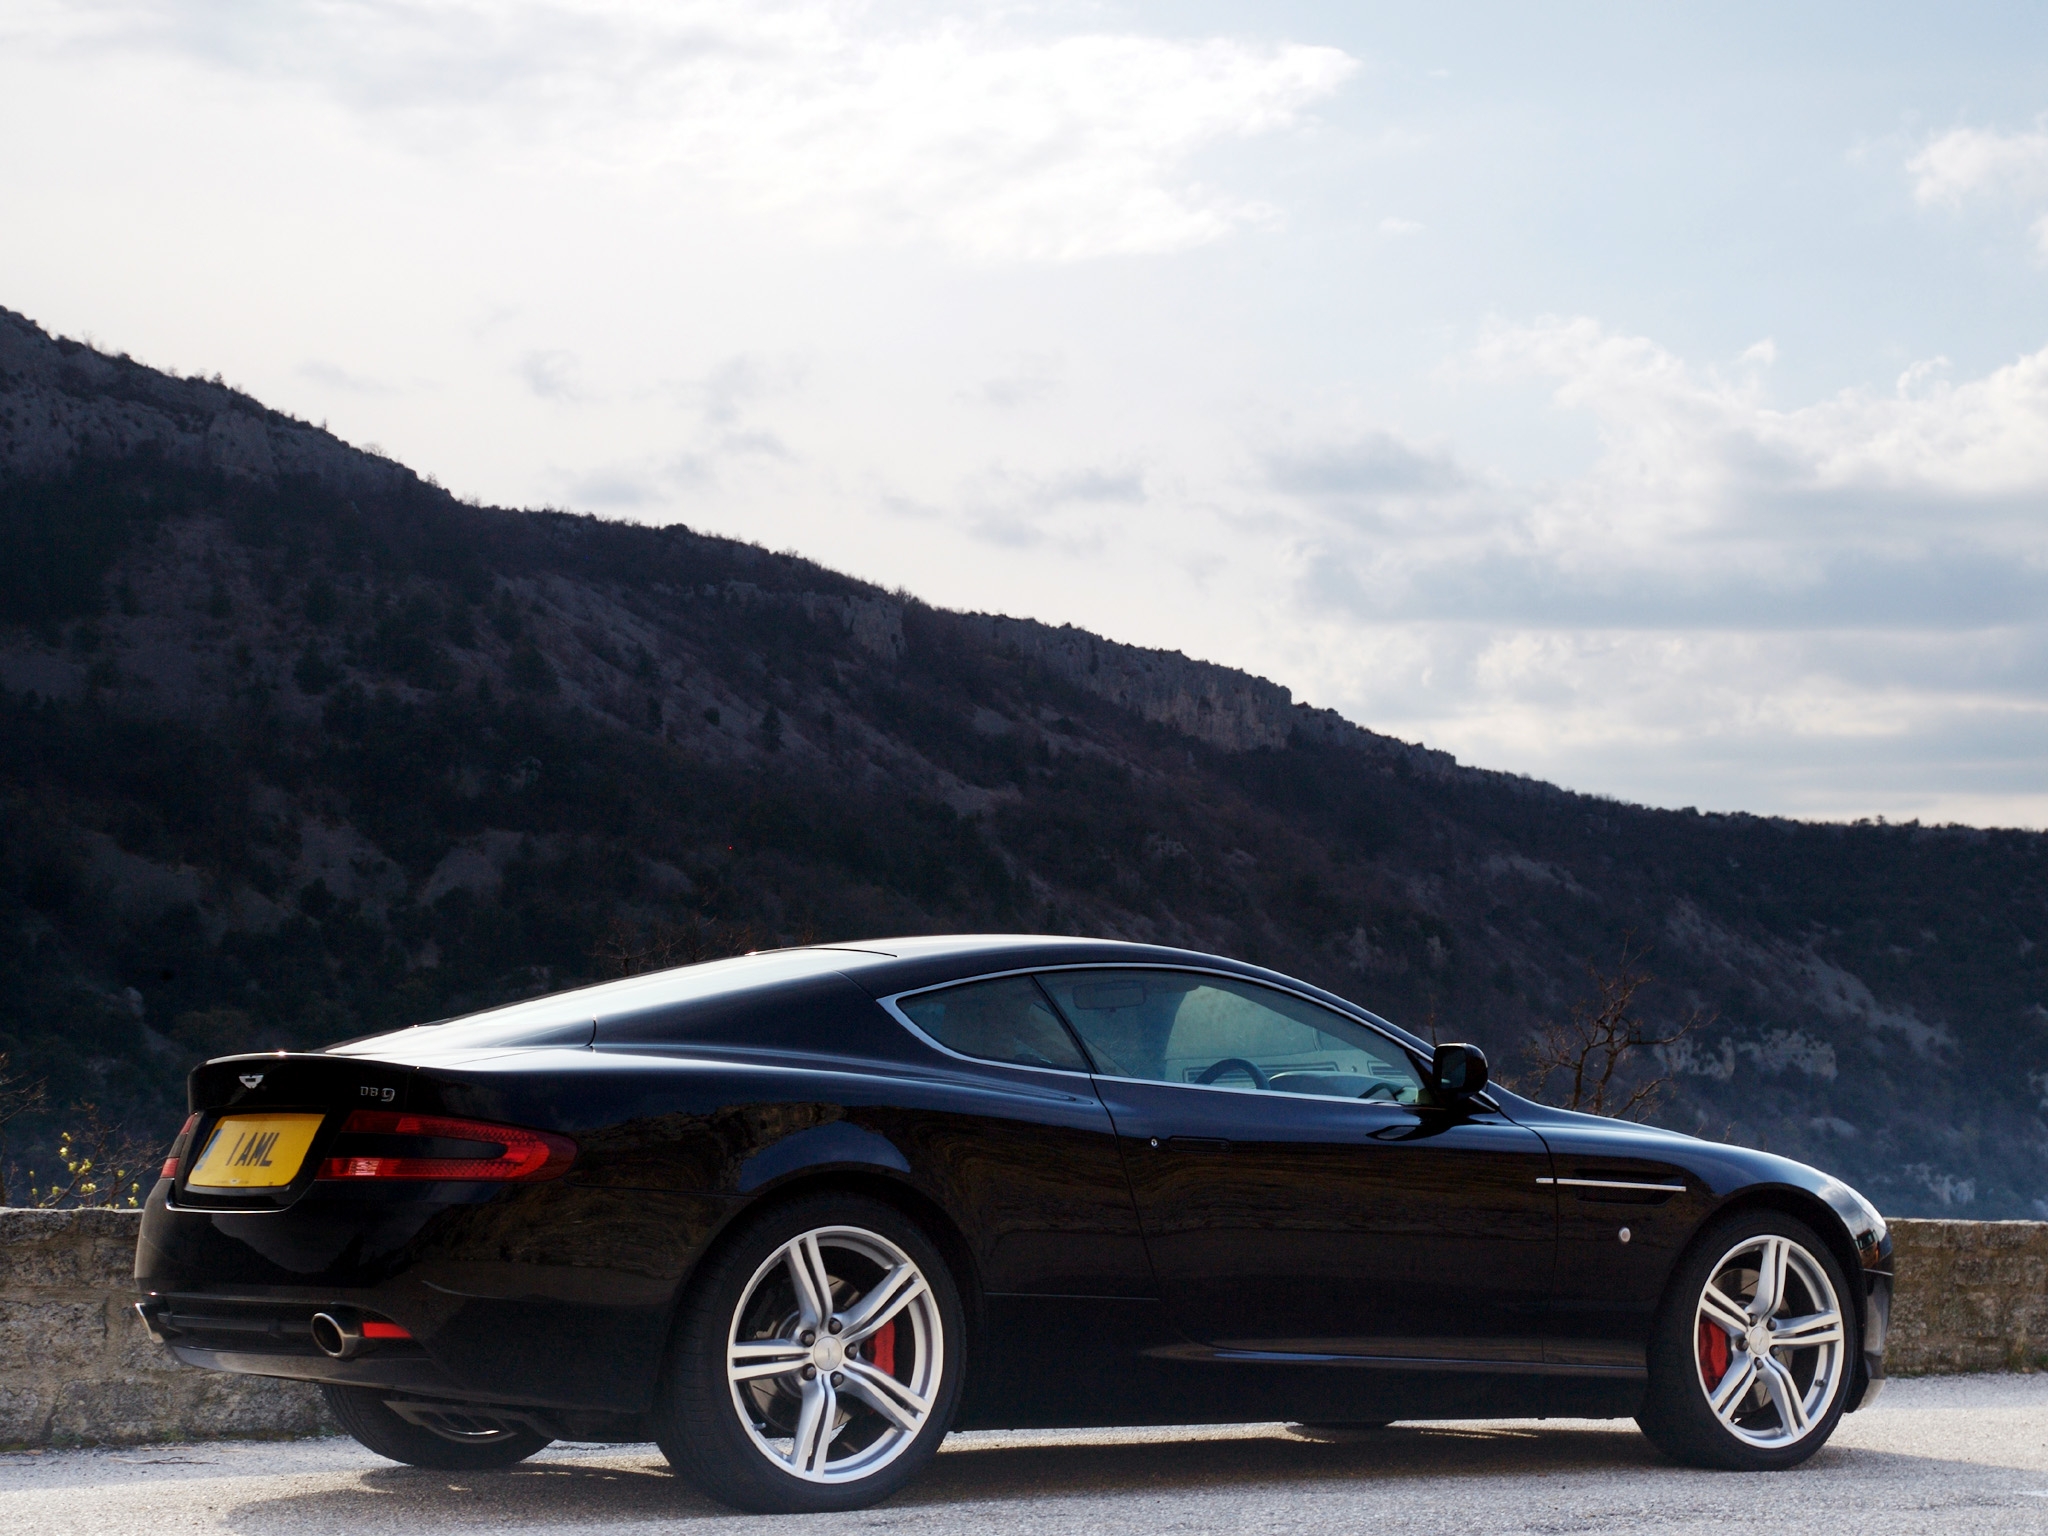 sports, auto, nature, trees, sky, mountains, aston martin, cars, black, side view, style, db9, 2006